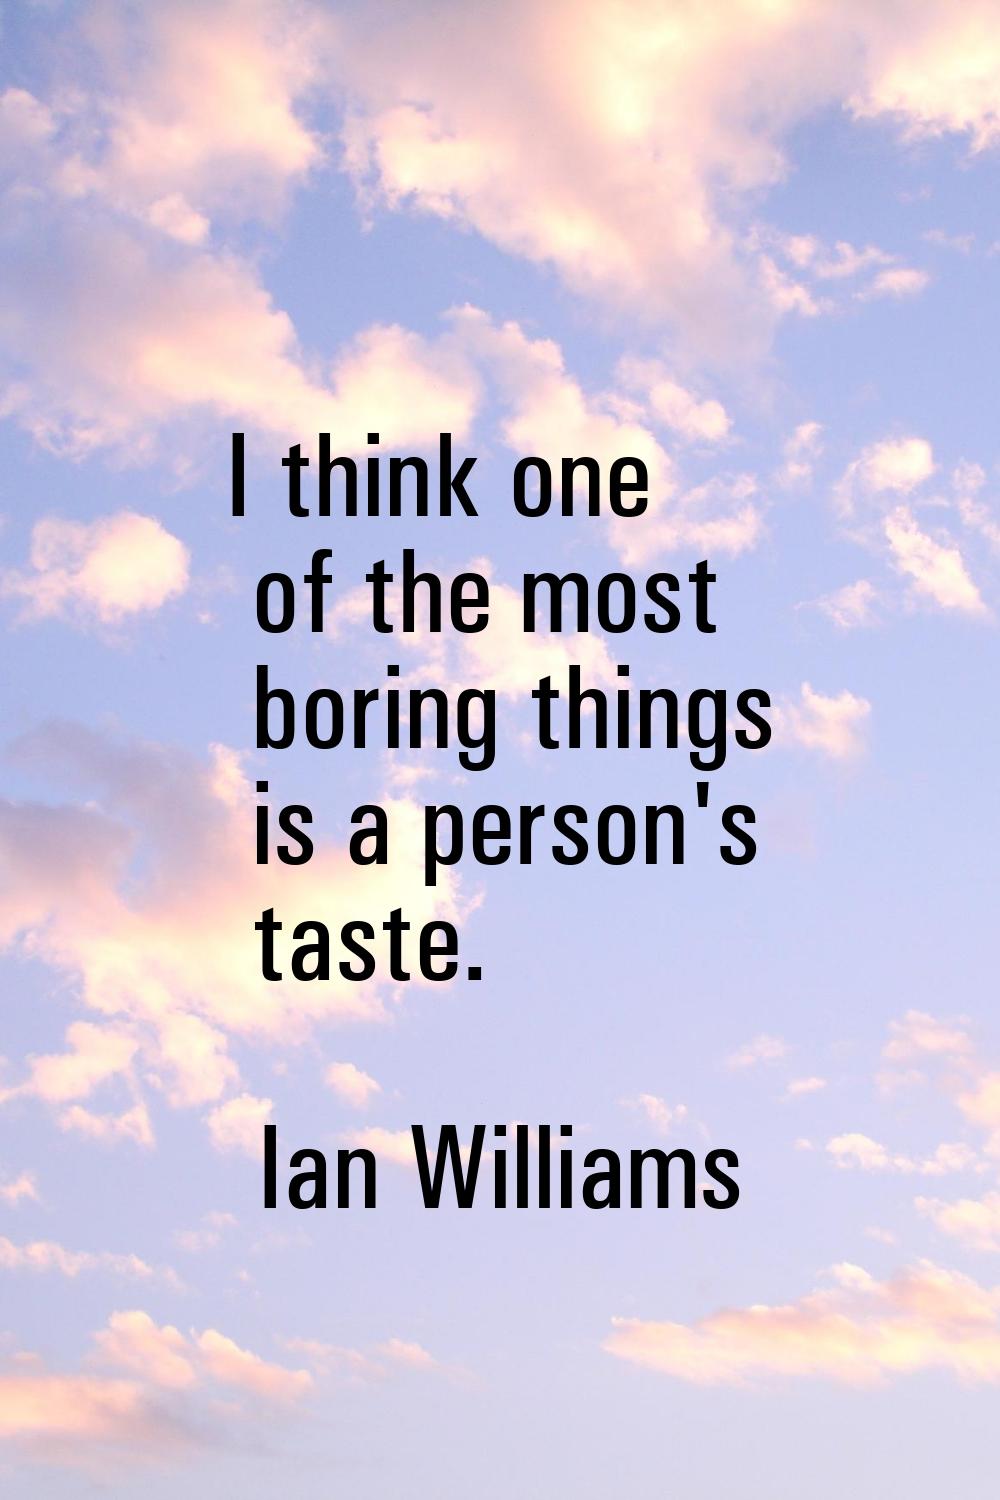 I think one of the most boring things is a person's taste.